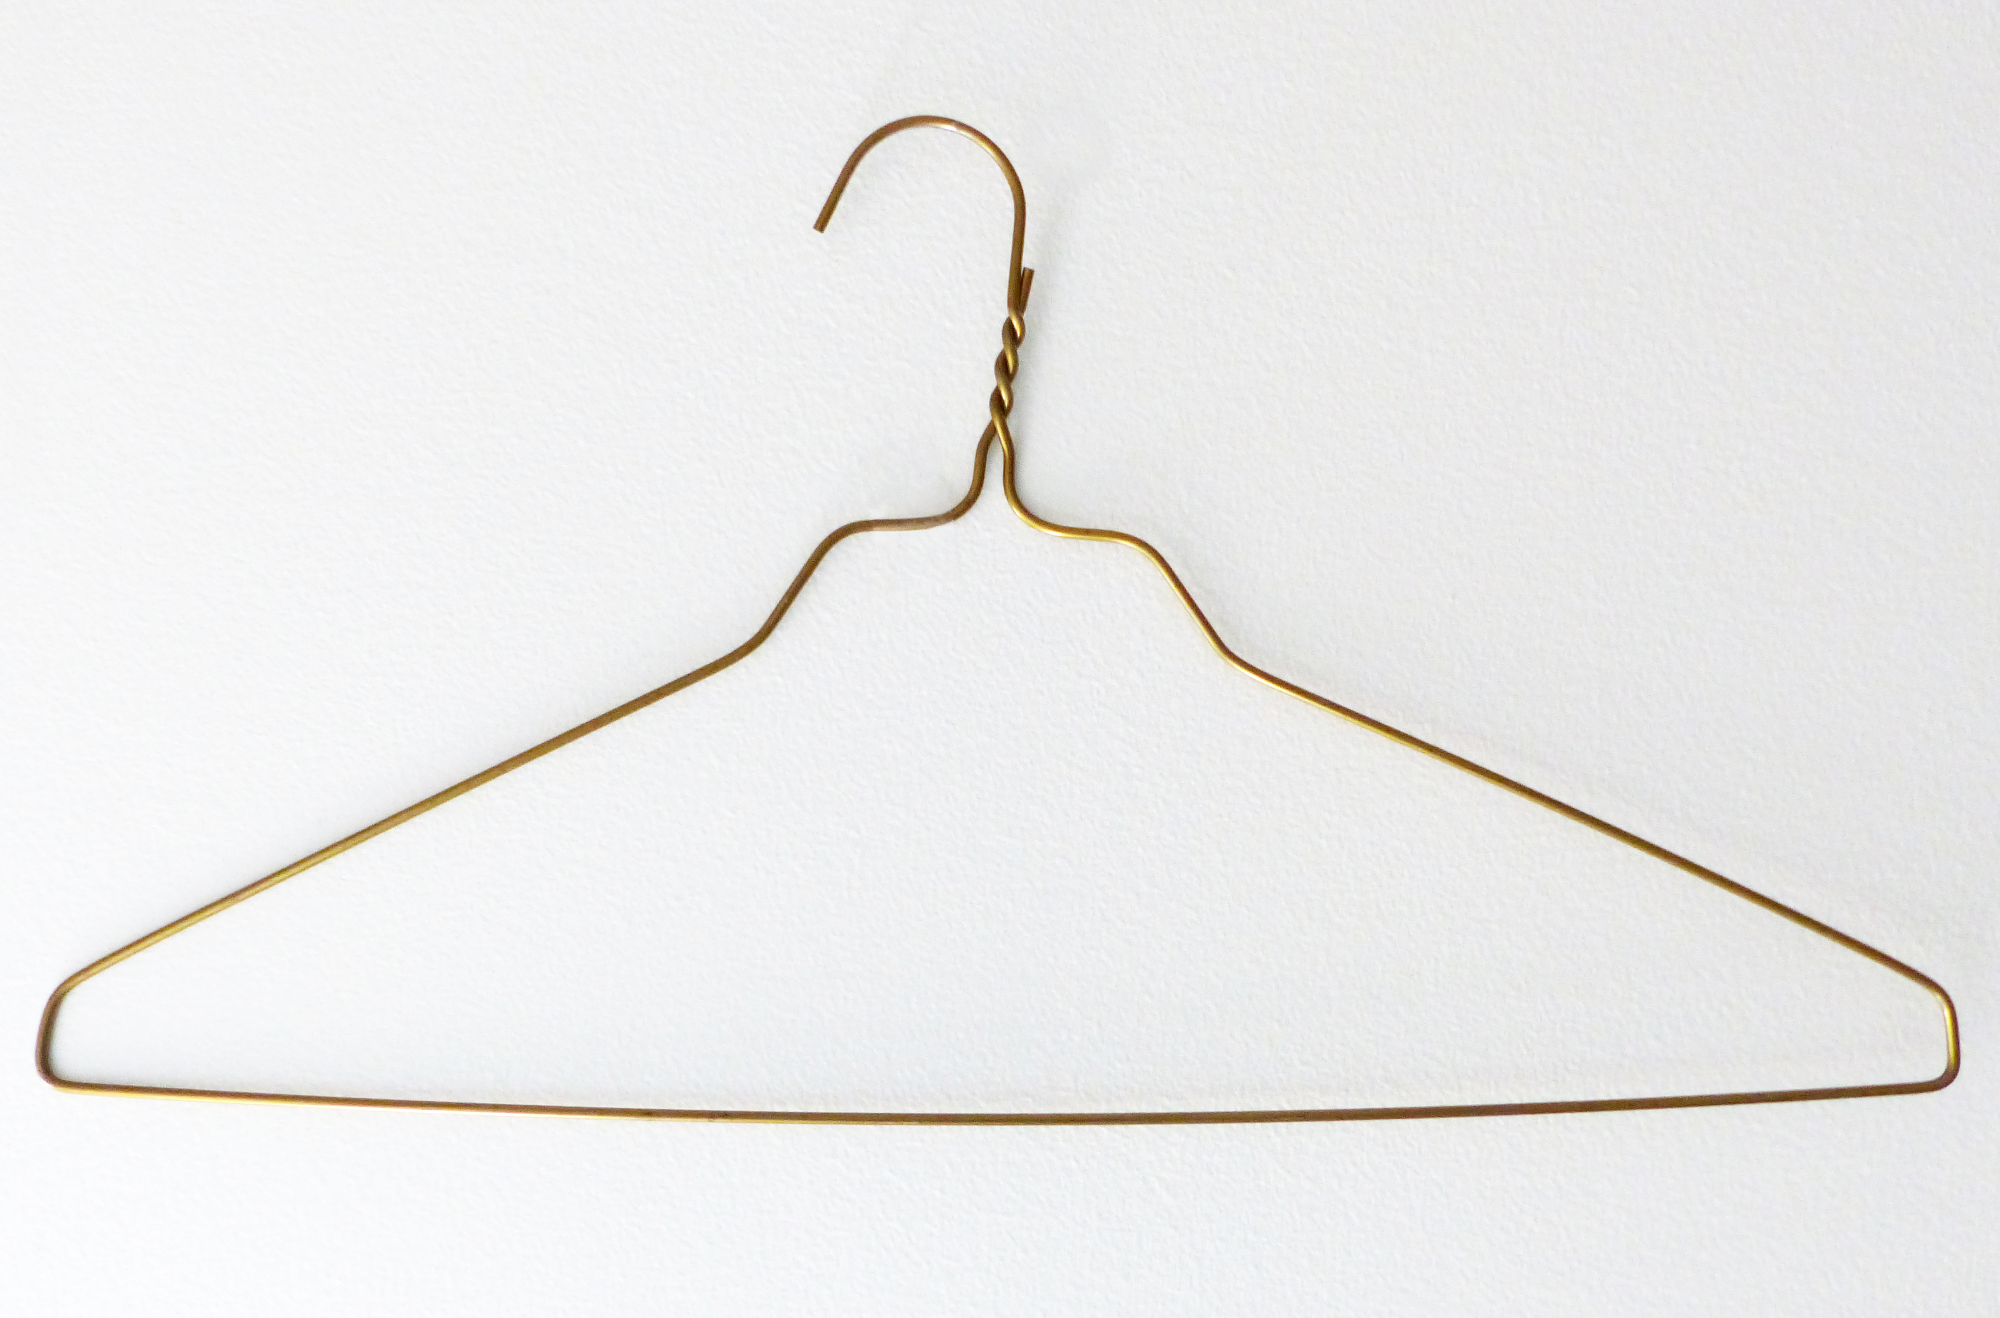 Failed Self-Abortion With a Wire Hanger”: A Letter from a Namesake